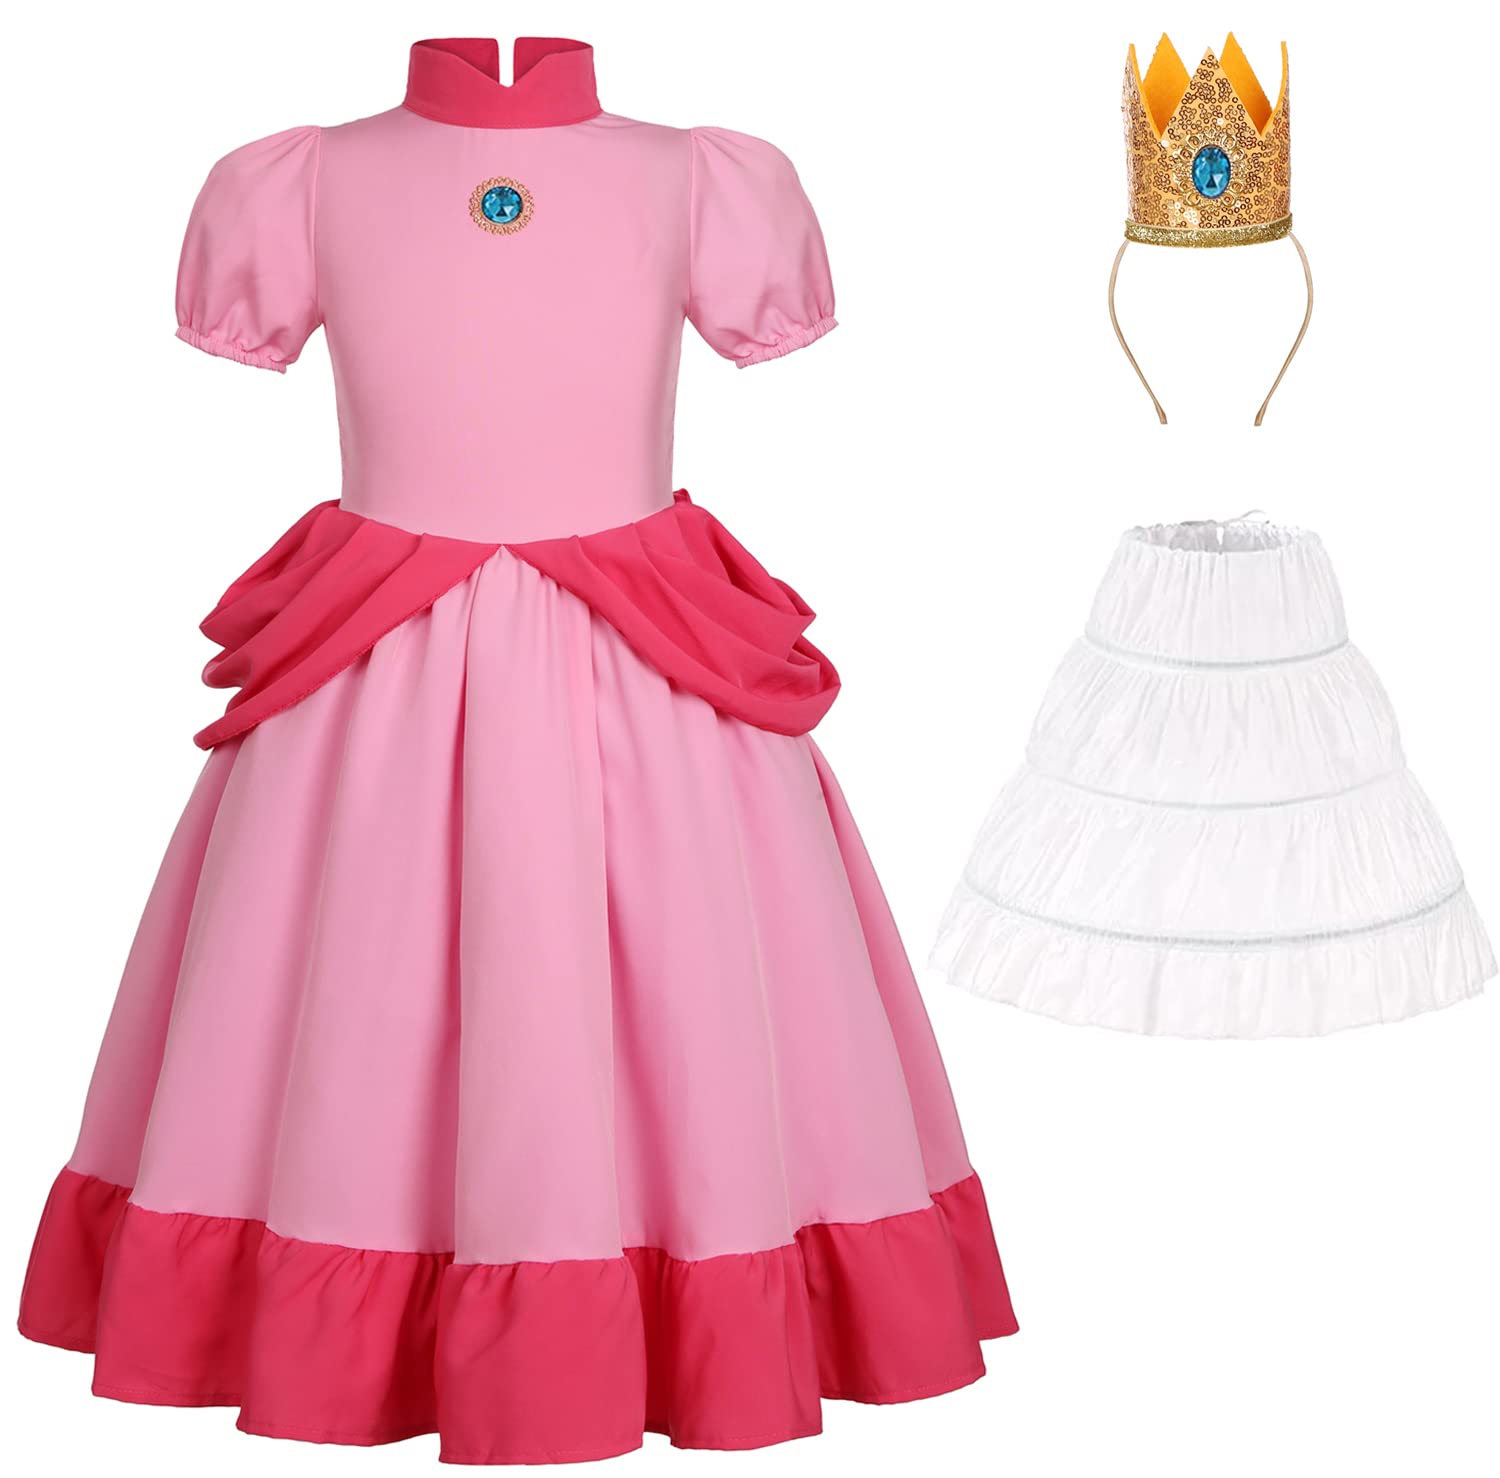 Girls Peach Costume Princess Dress With Crown for Deluxe Halloween Party Dress Up, 5-6 Years